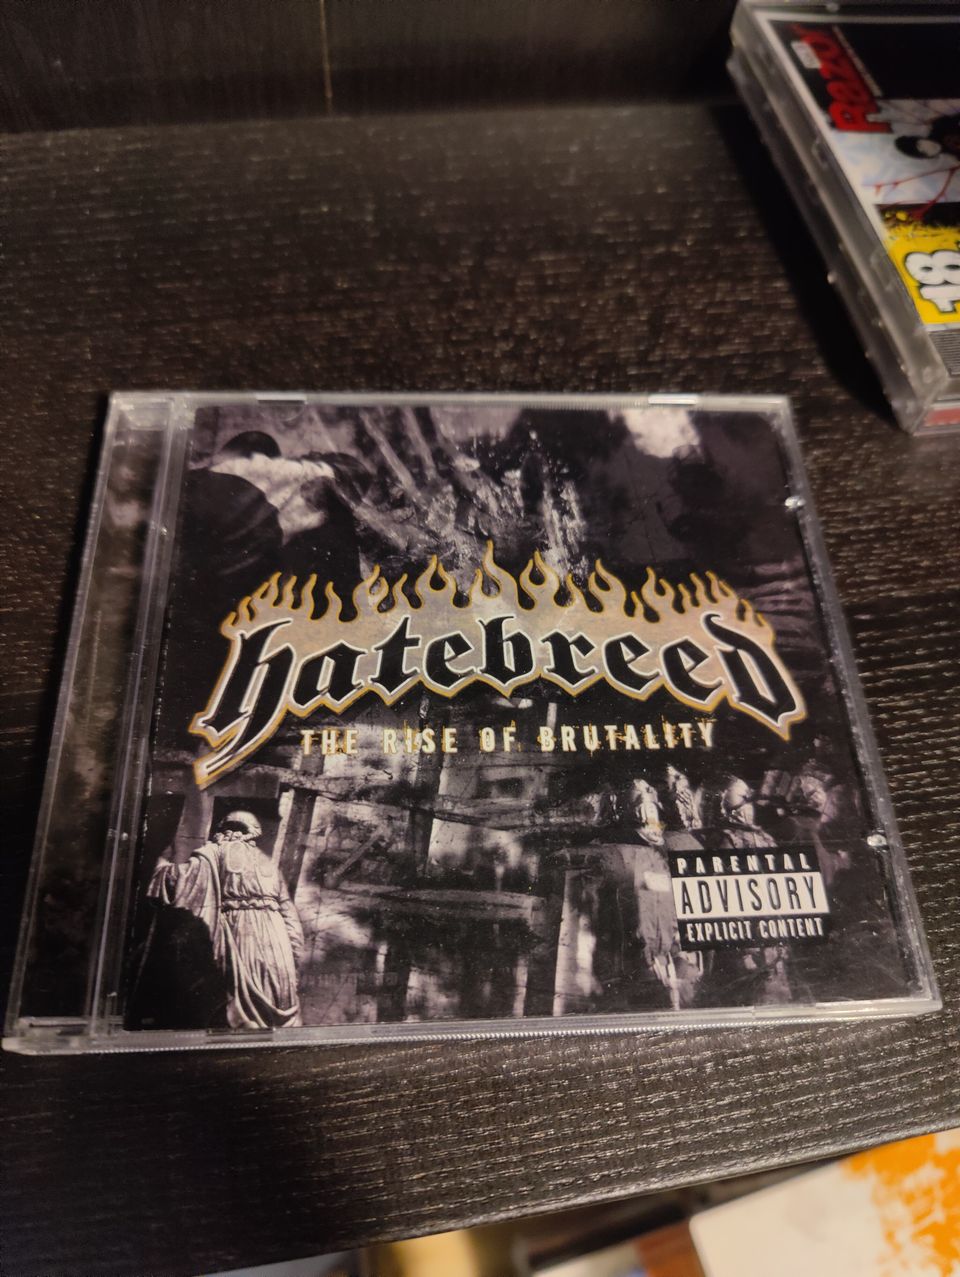 Hatebreed The rise of brutality CD VG+/EX+